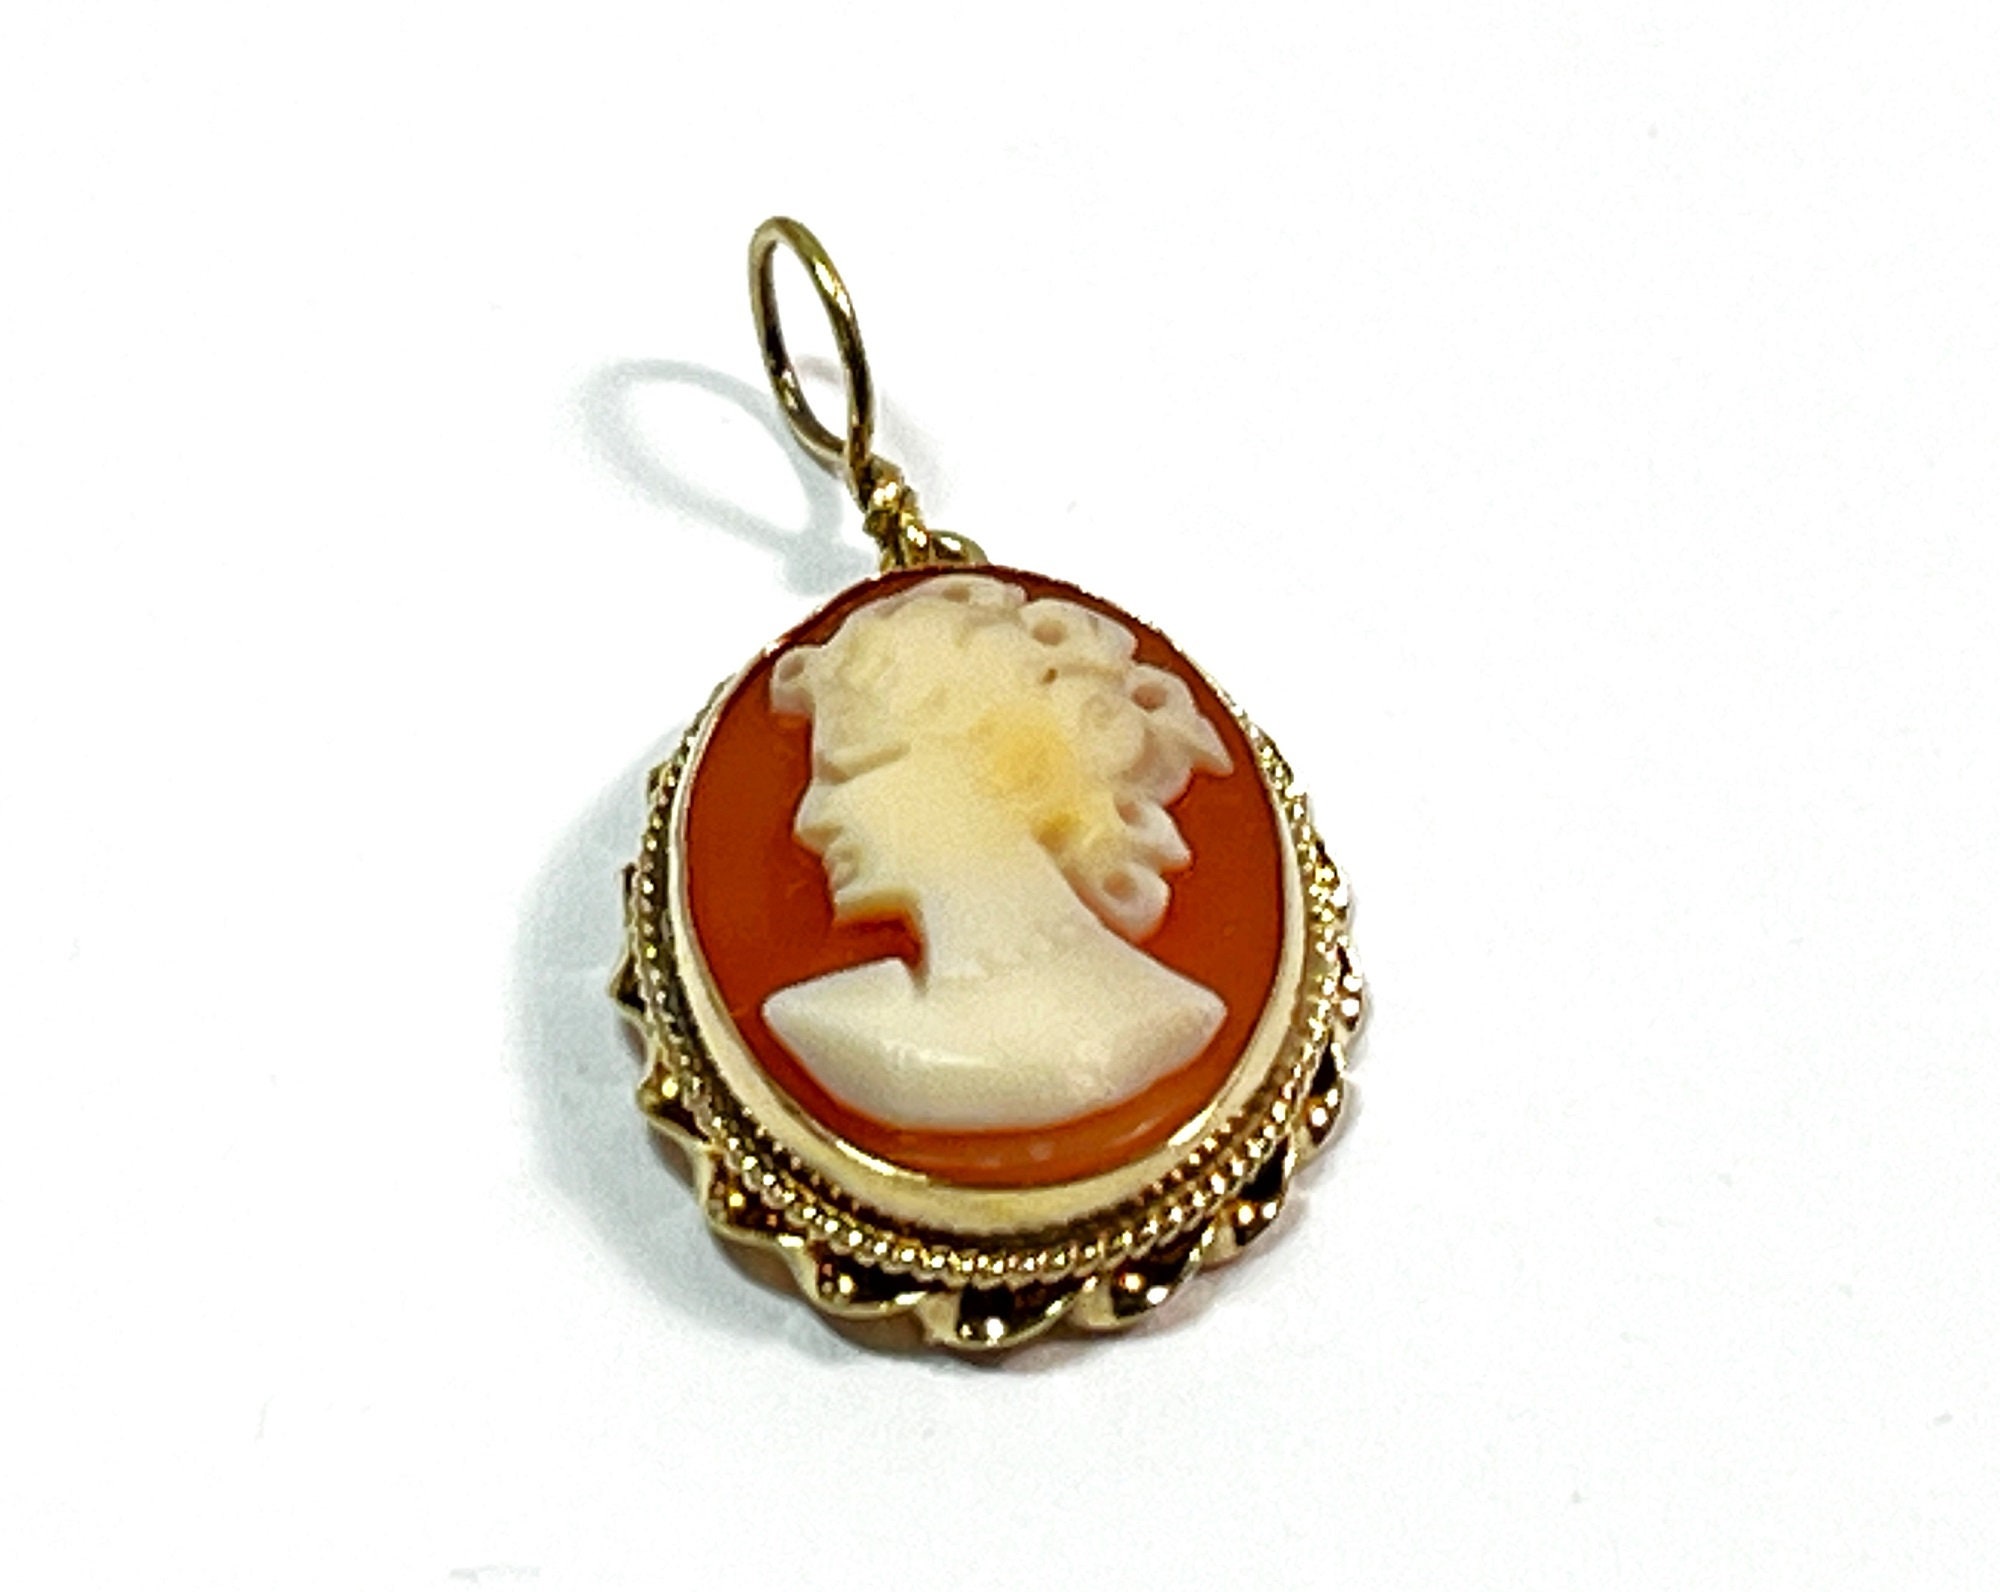 VINTAGE CAMEO PENDANT 14K YELLOW GOLD BROOCH NECKLACE PIN ESTATE JEWELRY